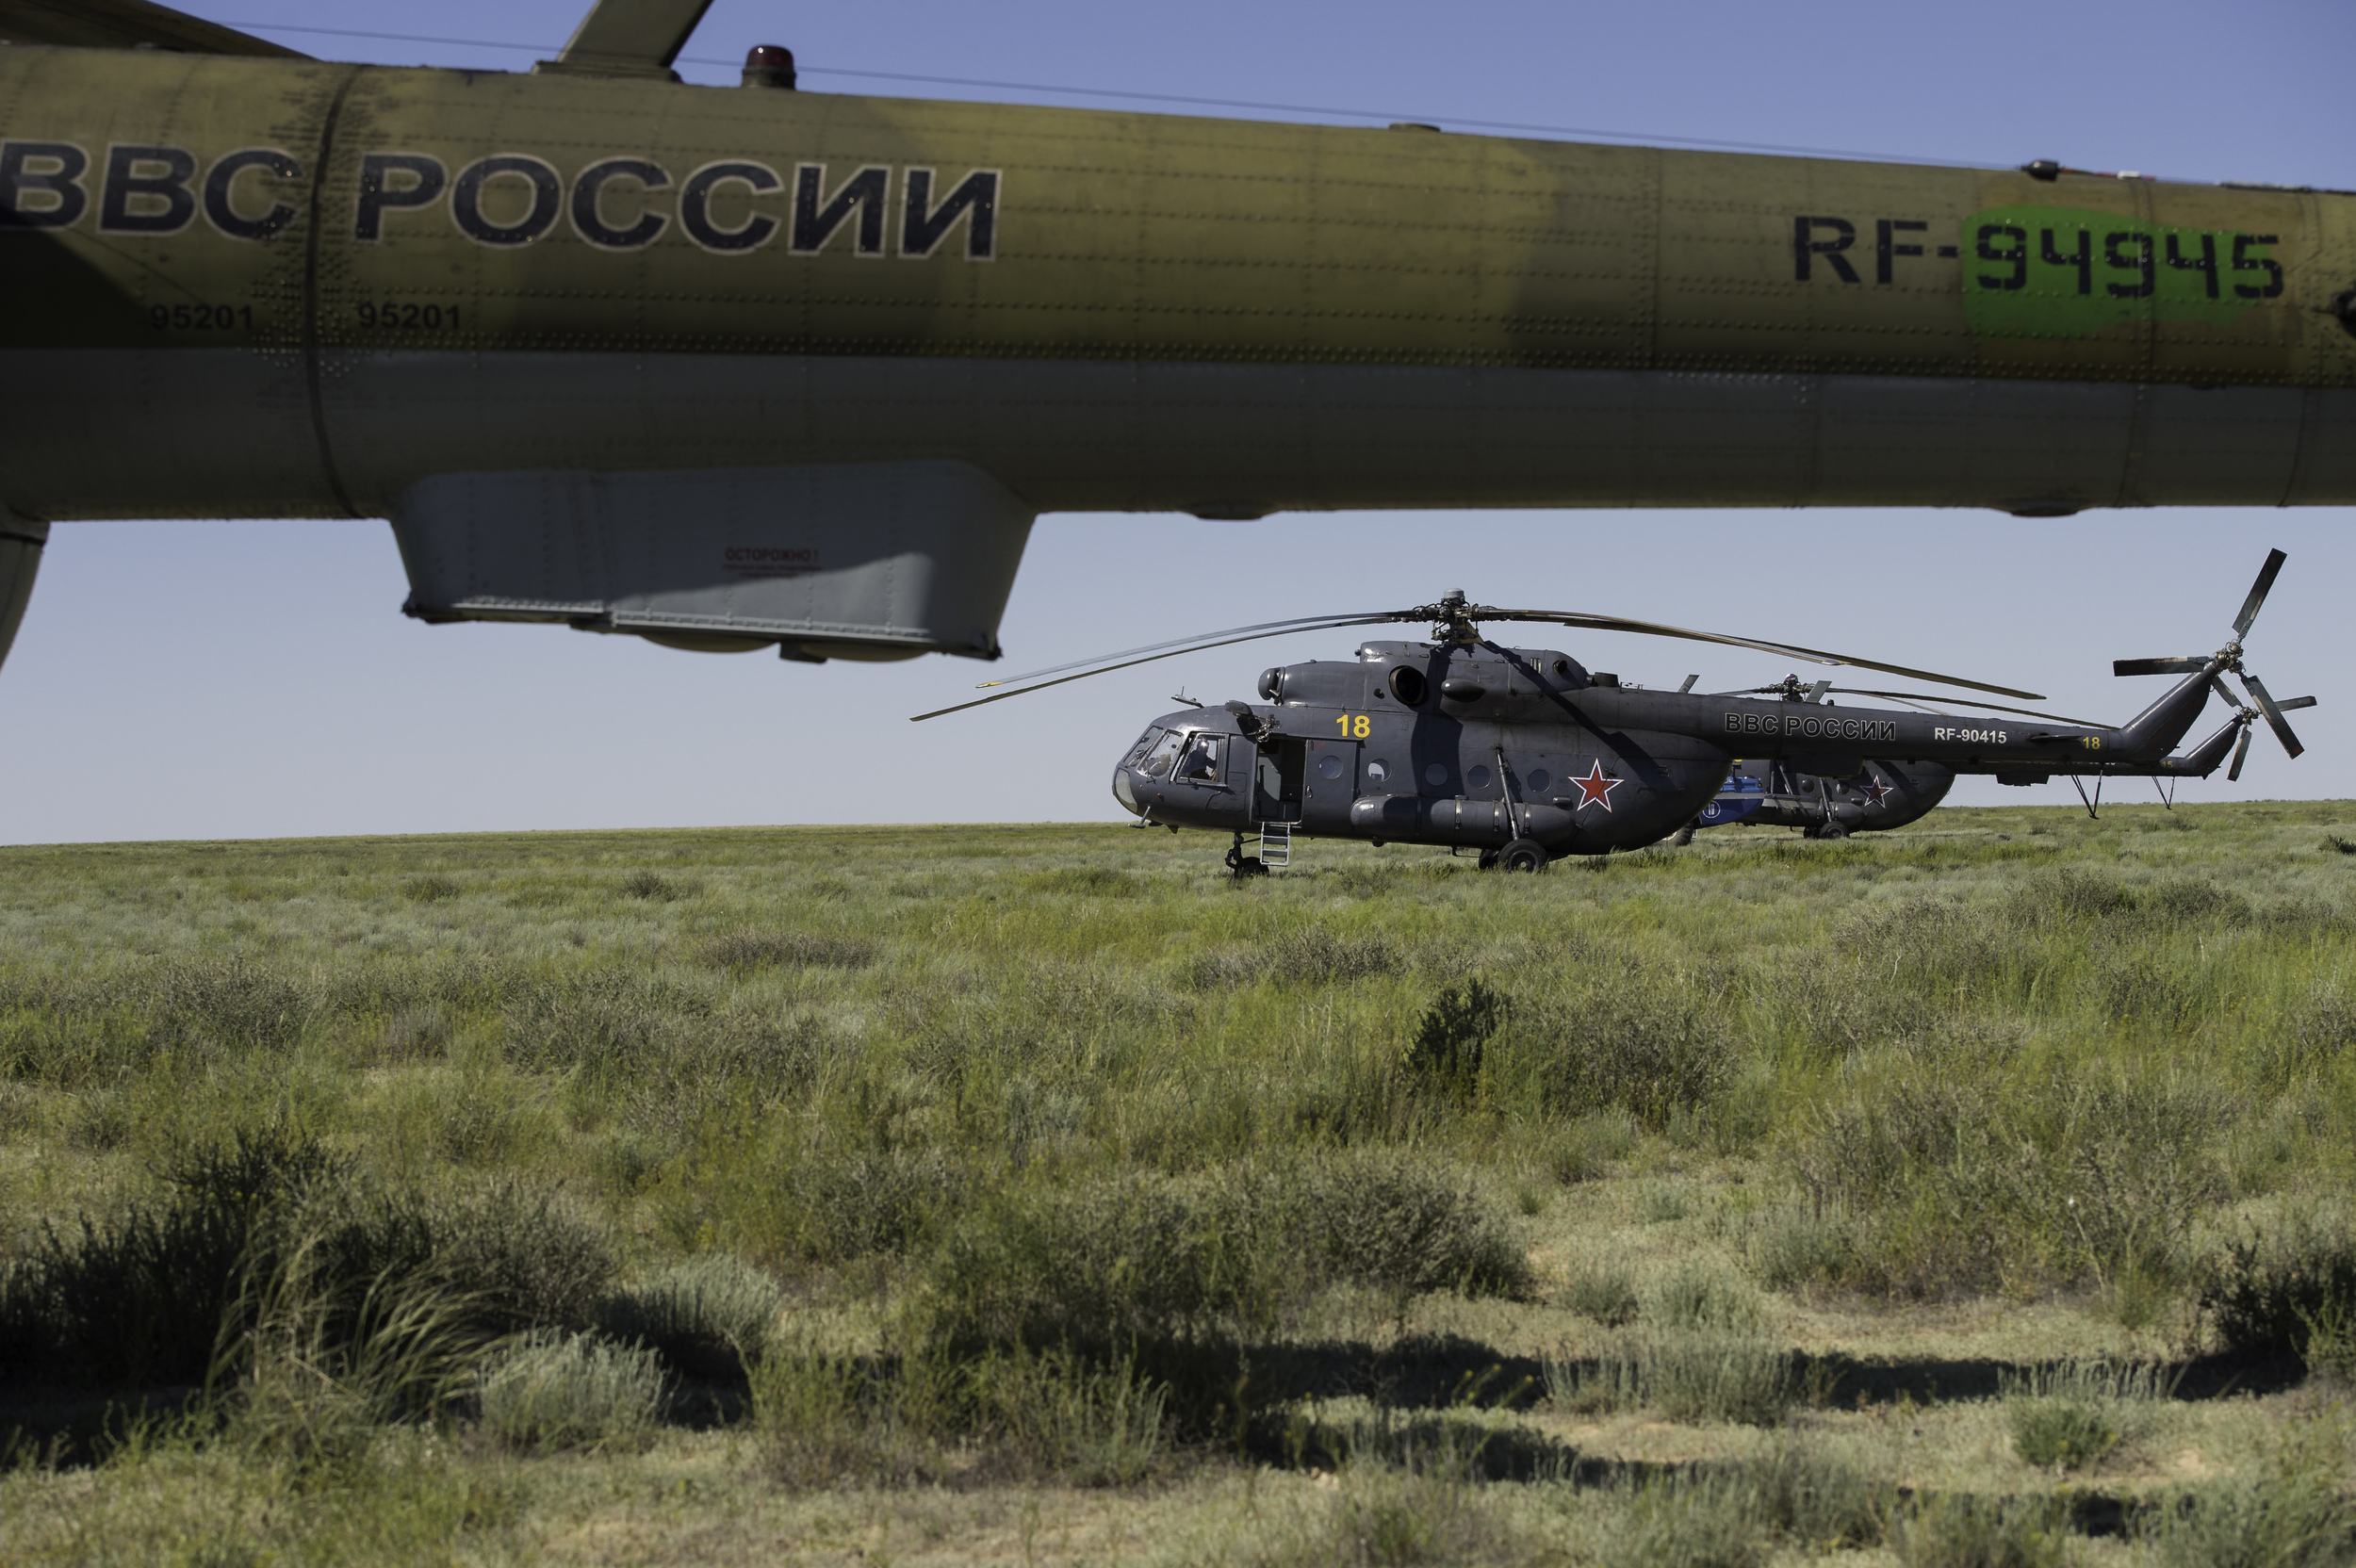  Russian Search and Rescue Helicopters are seen as they await departure from the landing zone in a remote area near the town of Zhezkazgan, Kazakhstan following the the landing of the Soyuz TMA-07M spacecraft on Tuesday, May 14, 2013. The Soyuz space